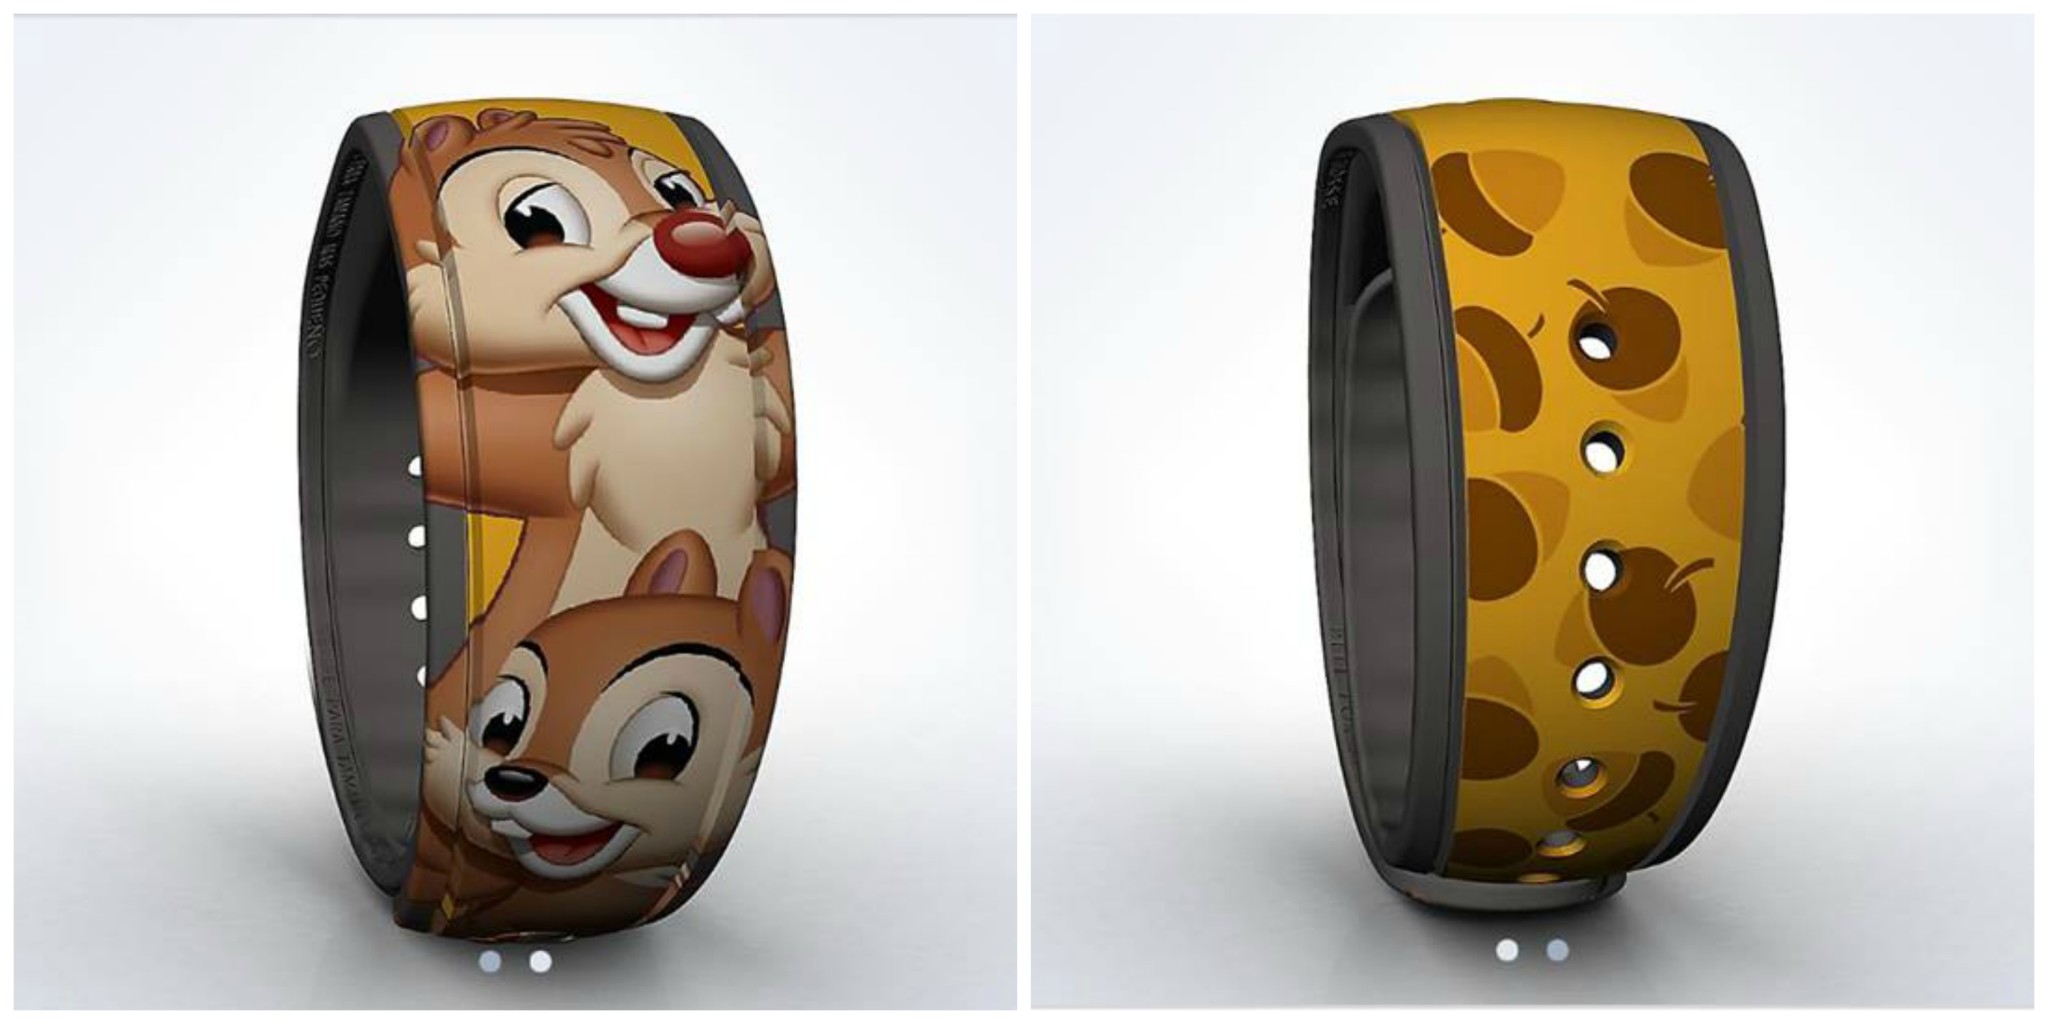 Our Favorite MagicBand Round Up